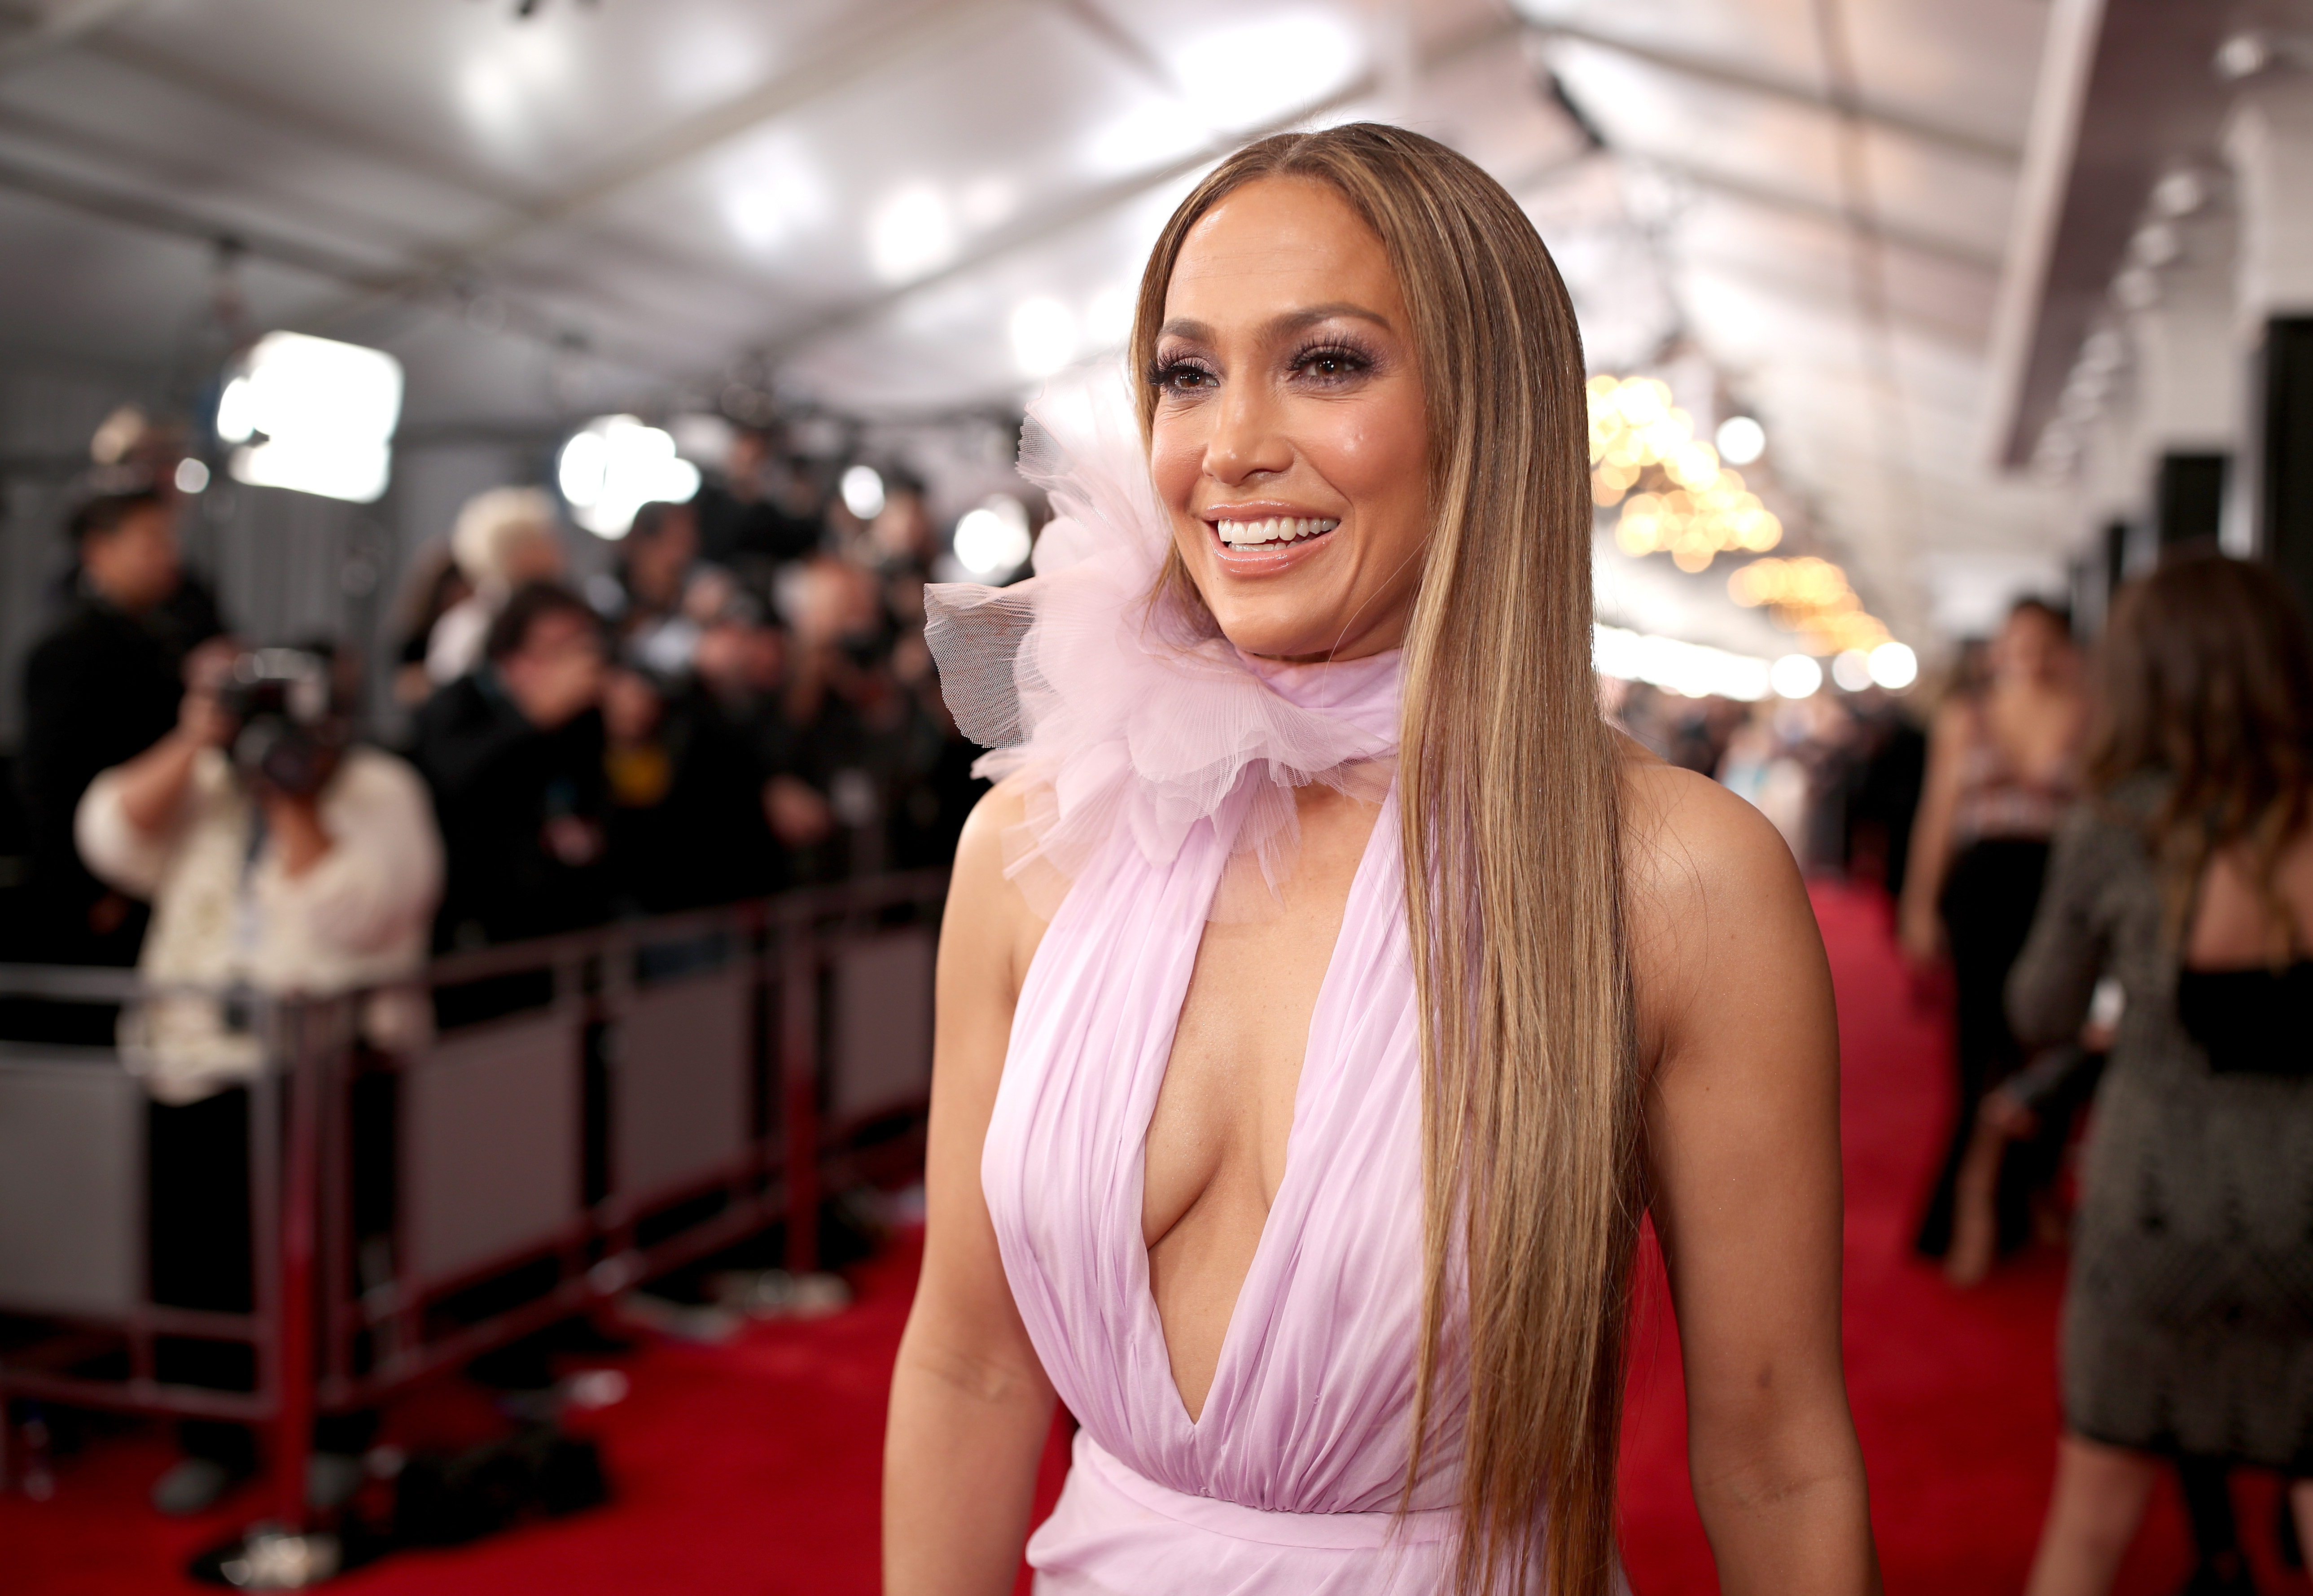 Jennifer Lopez at the Grammy Awards on February 12, 2017 in Los Angeles, California.  (Photo by Christopher Polk/Getty)